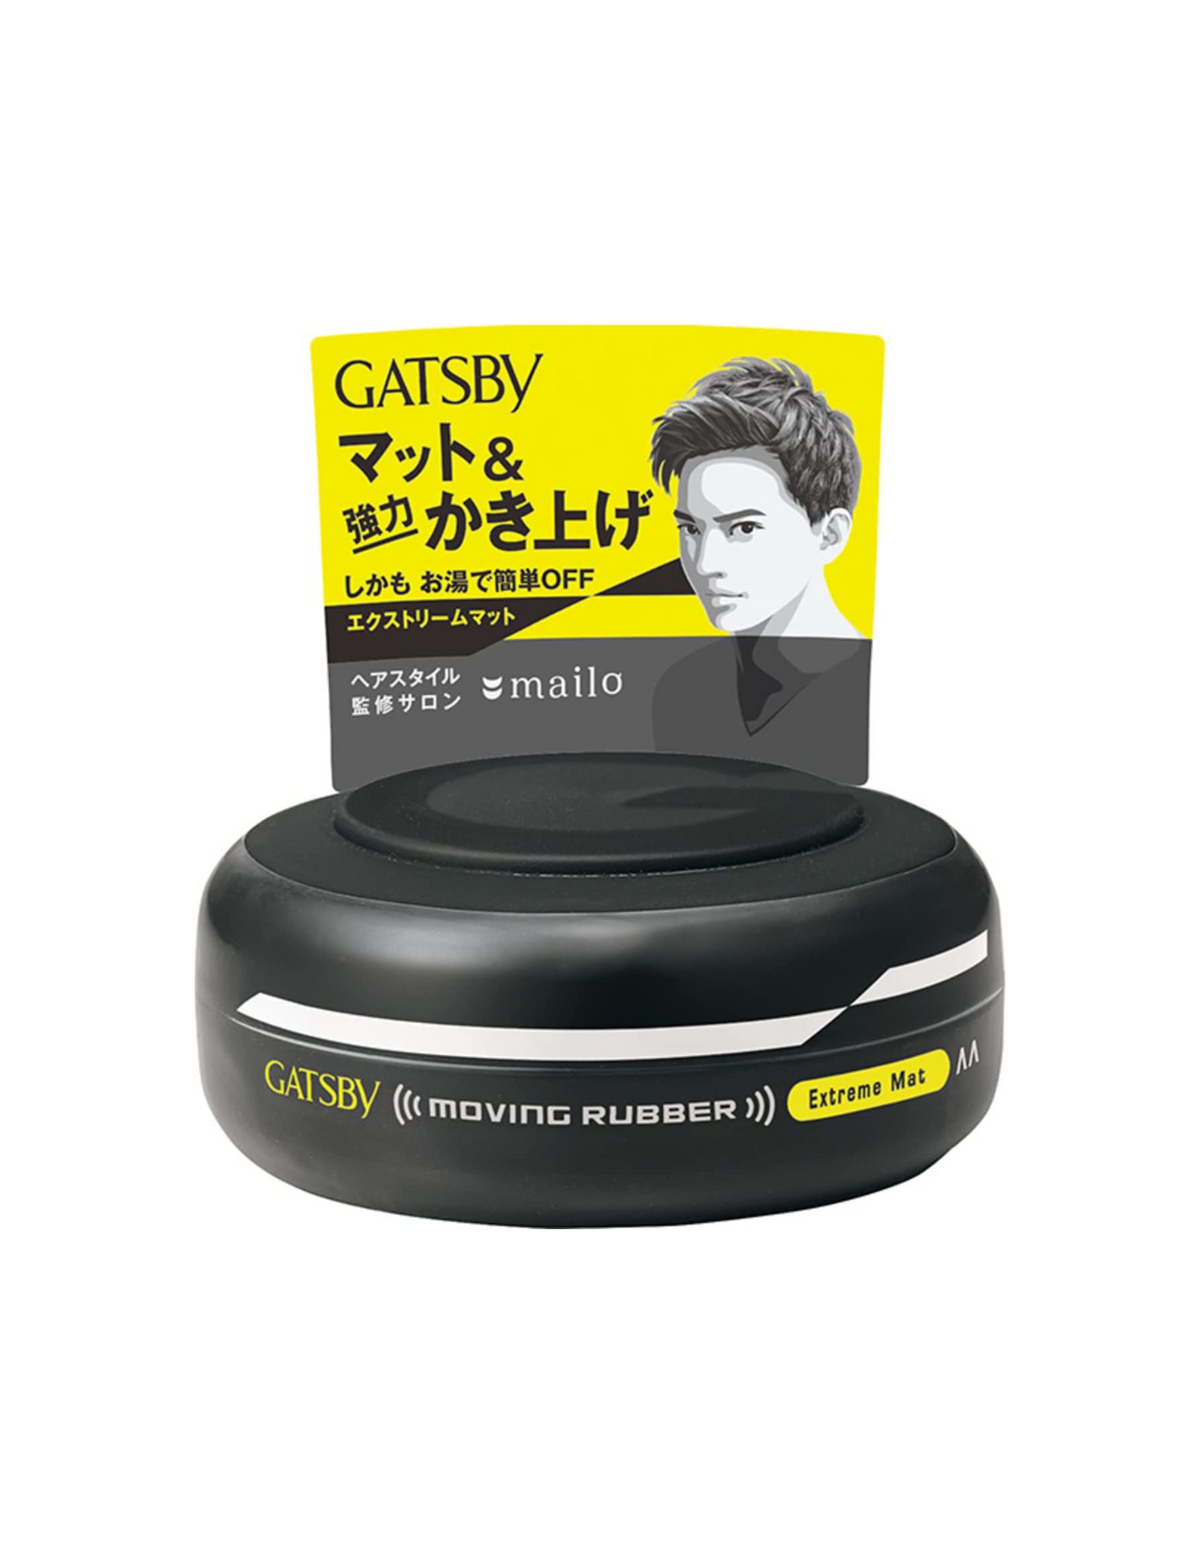 Gatsby Moving Rubber Extreme Mat Hair Wax